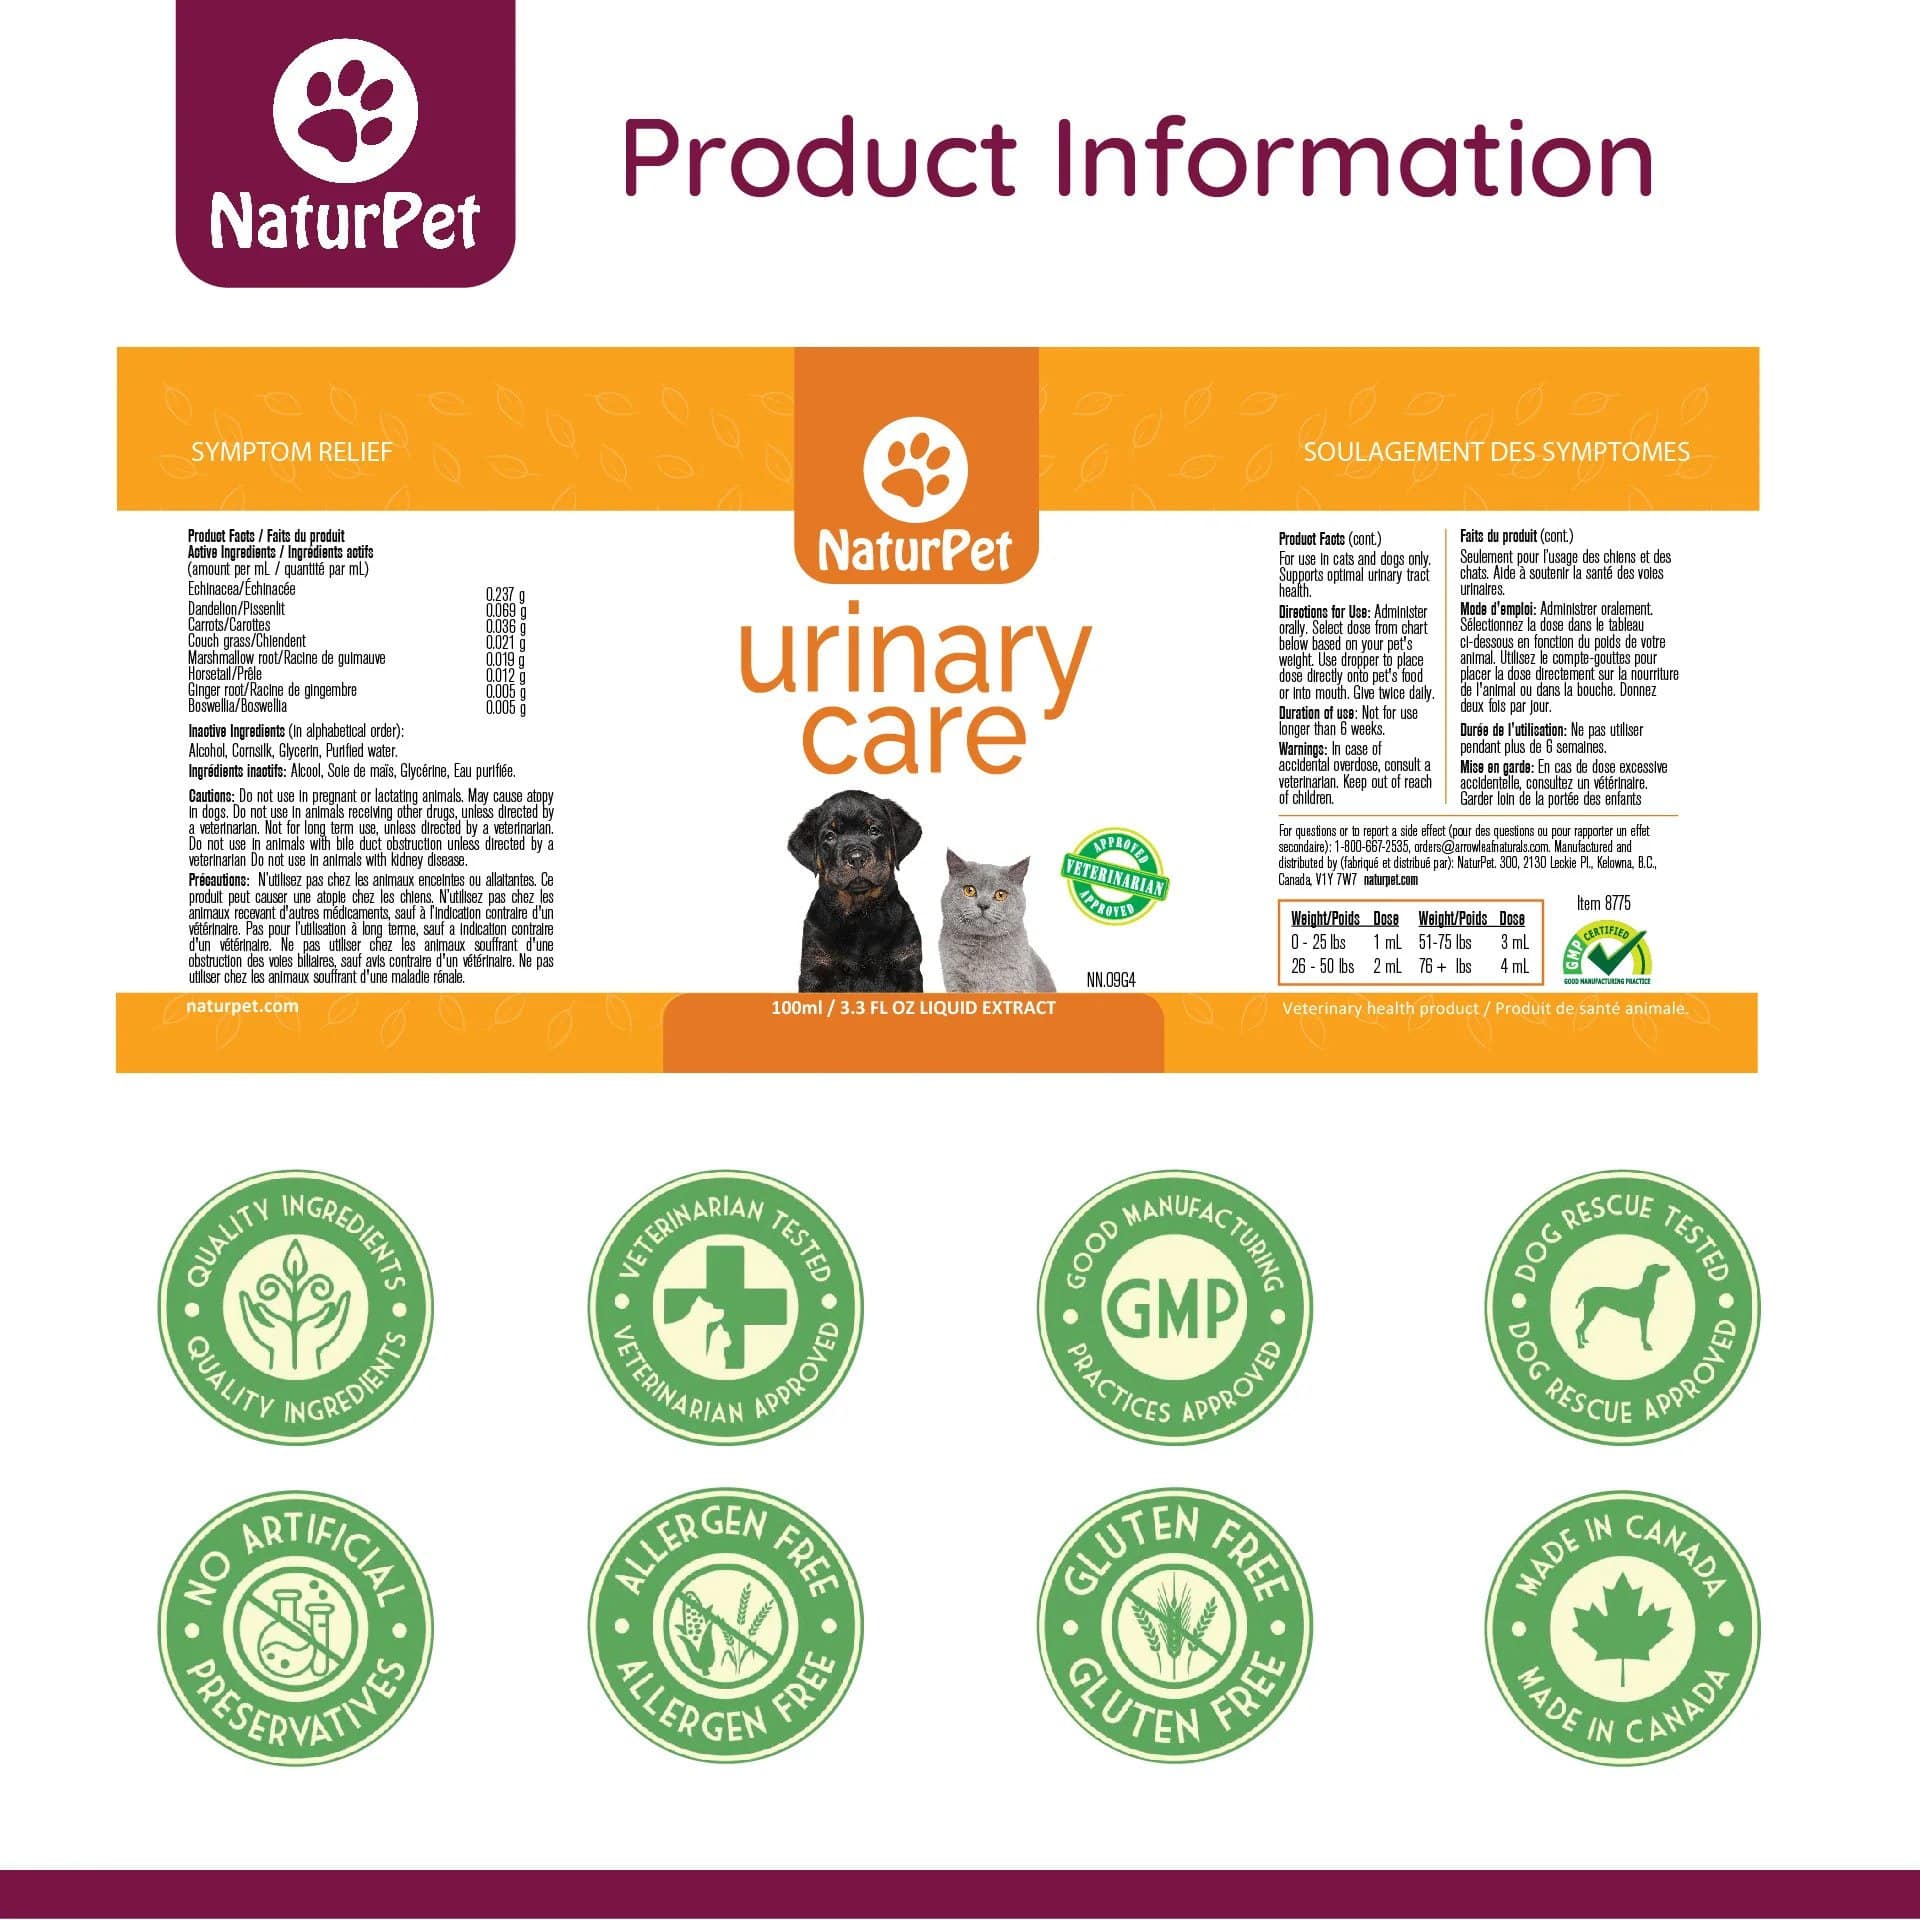 NaturPet Urinary Care Product Information